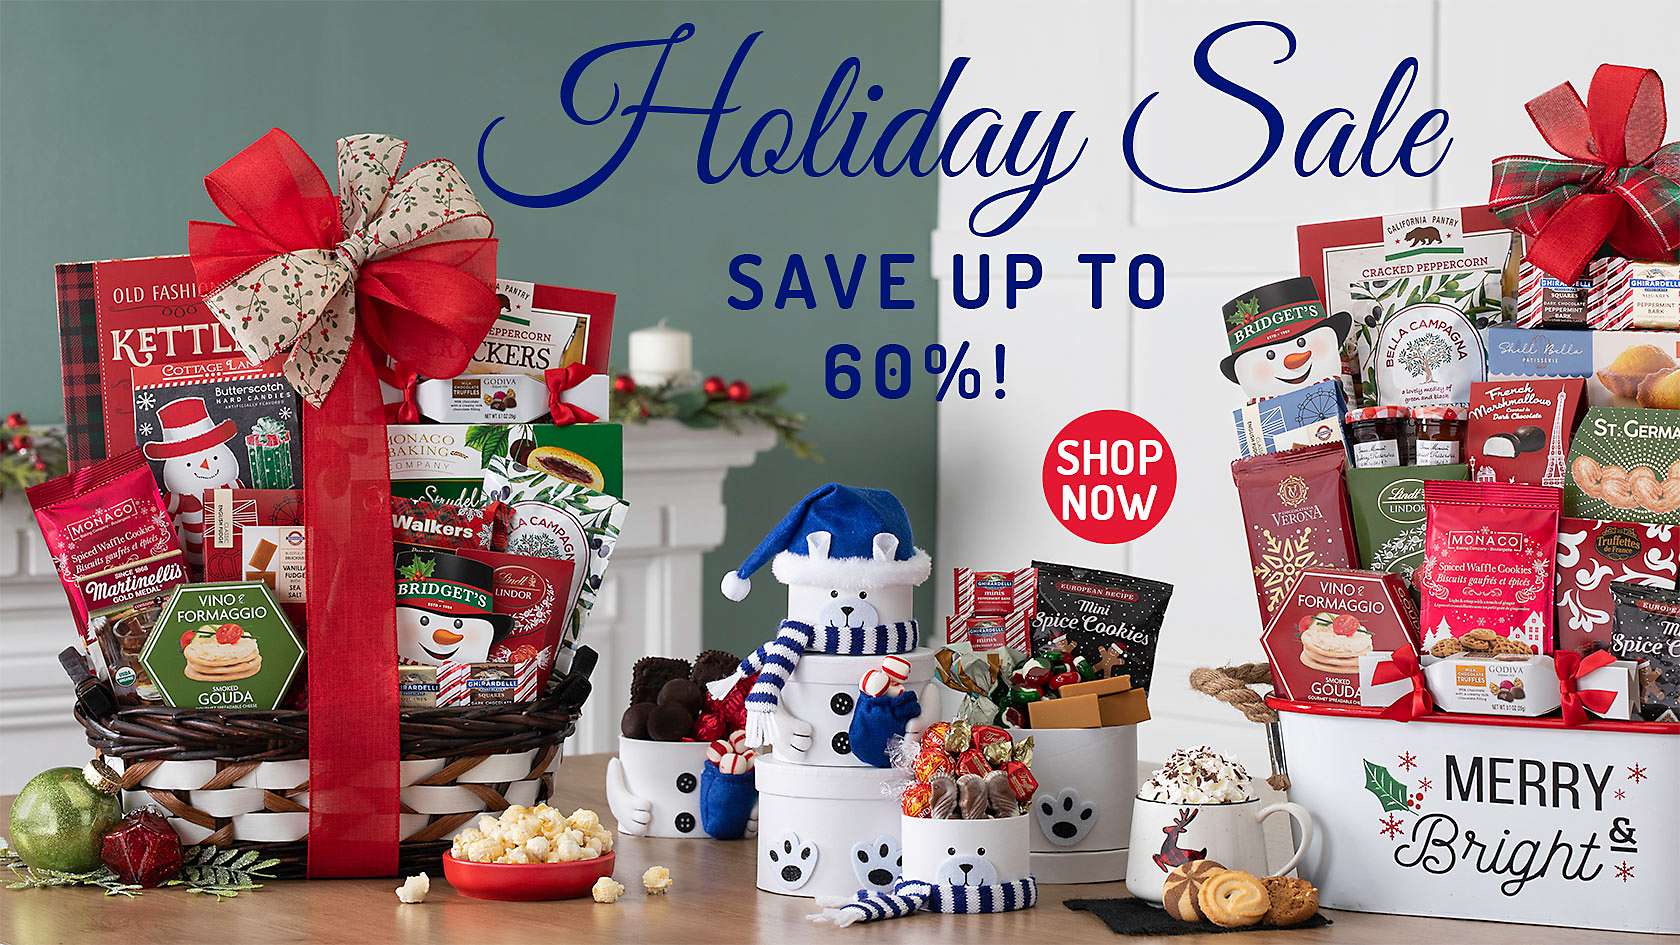 Holiday sale - save up to 60%